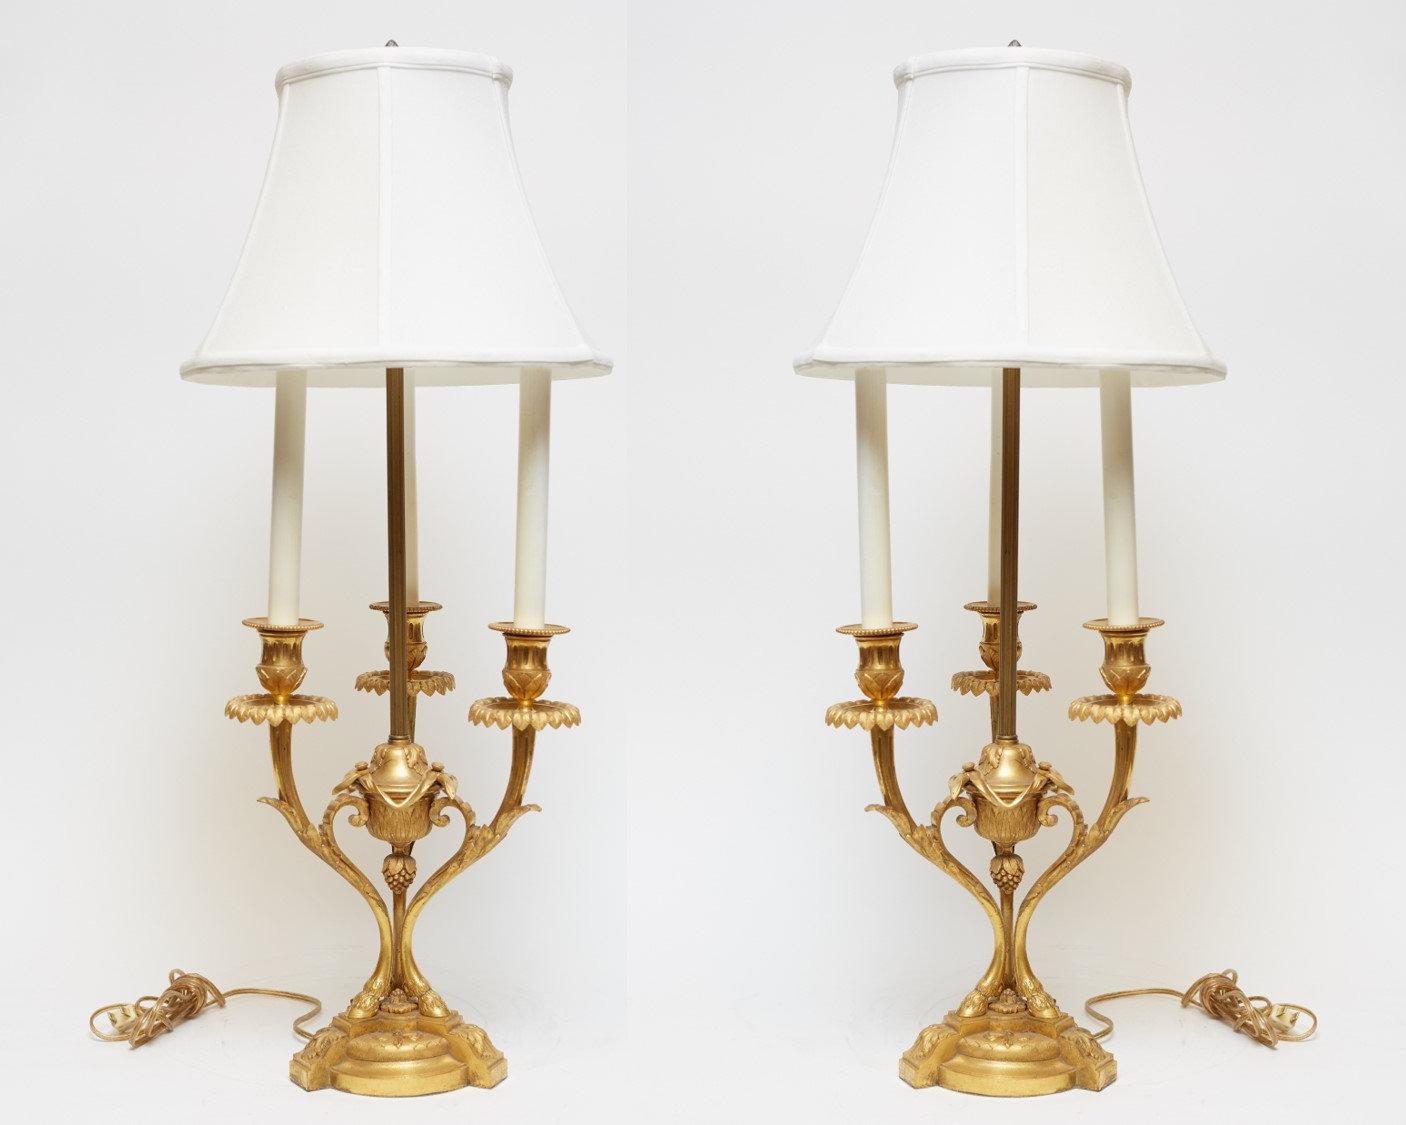 Pair of antique gilt bronze candelabra in the French Louis XVI style, electrified with modern sockets, candle covers and wiring, with acorn finials cast in spelter. Shades are not available.